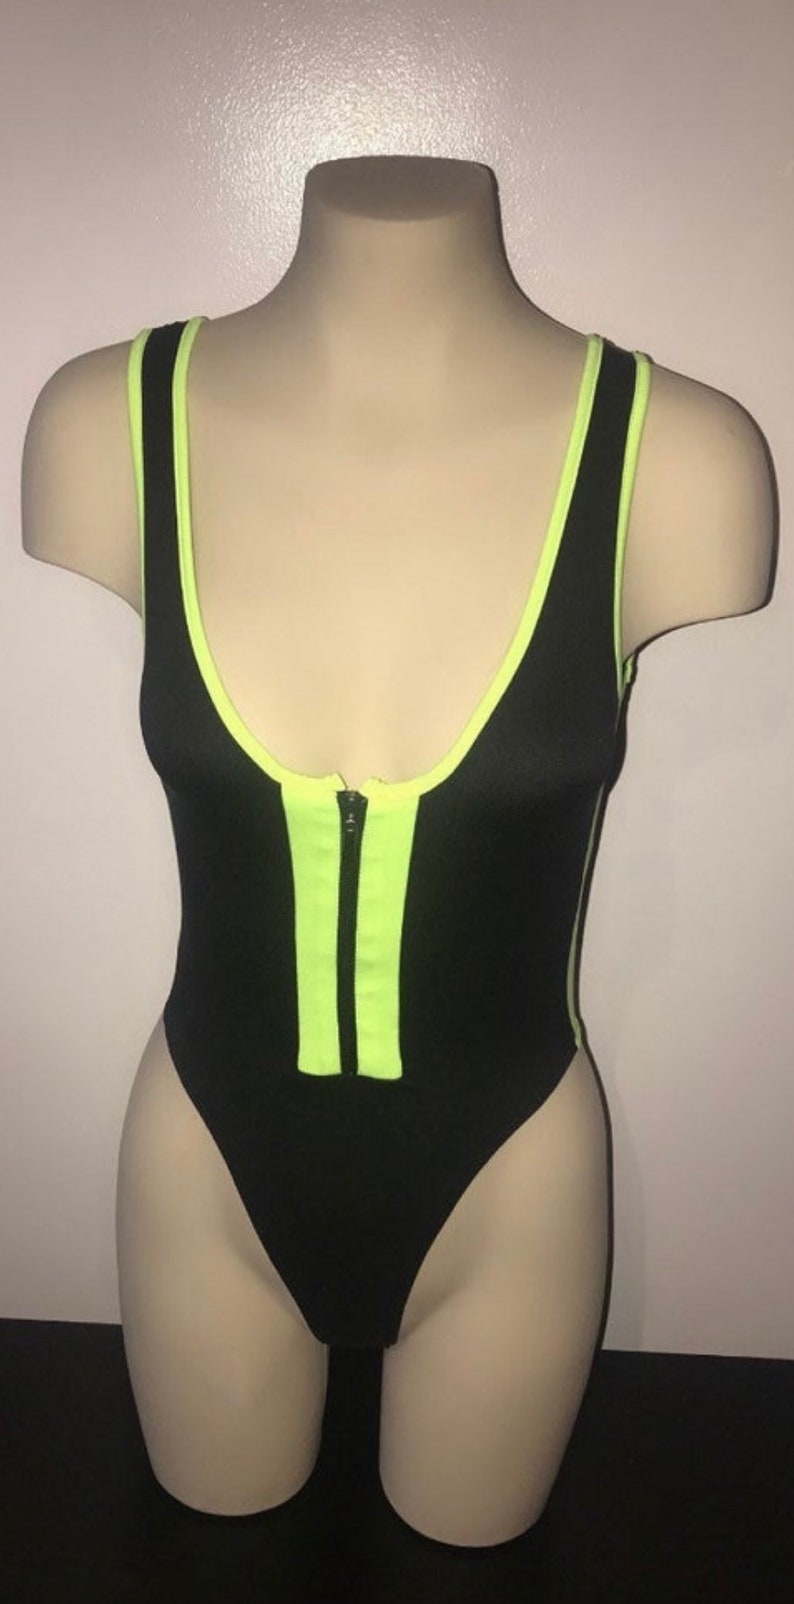 Bodysuit One Piece Set Neon Green  Rave Festival Coachella Ile Sonic Event Concert Club Party Night out Summer Spring Hot 2021 